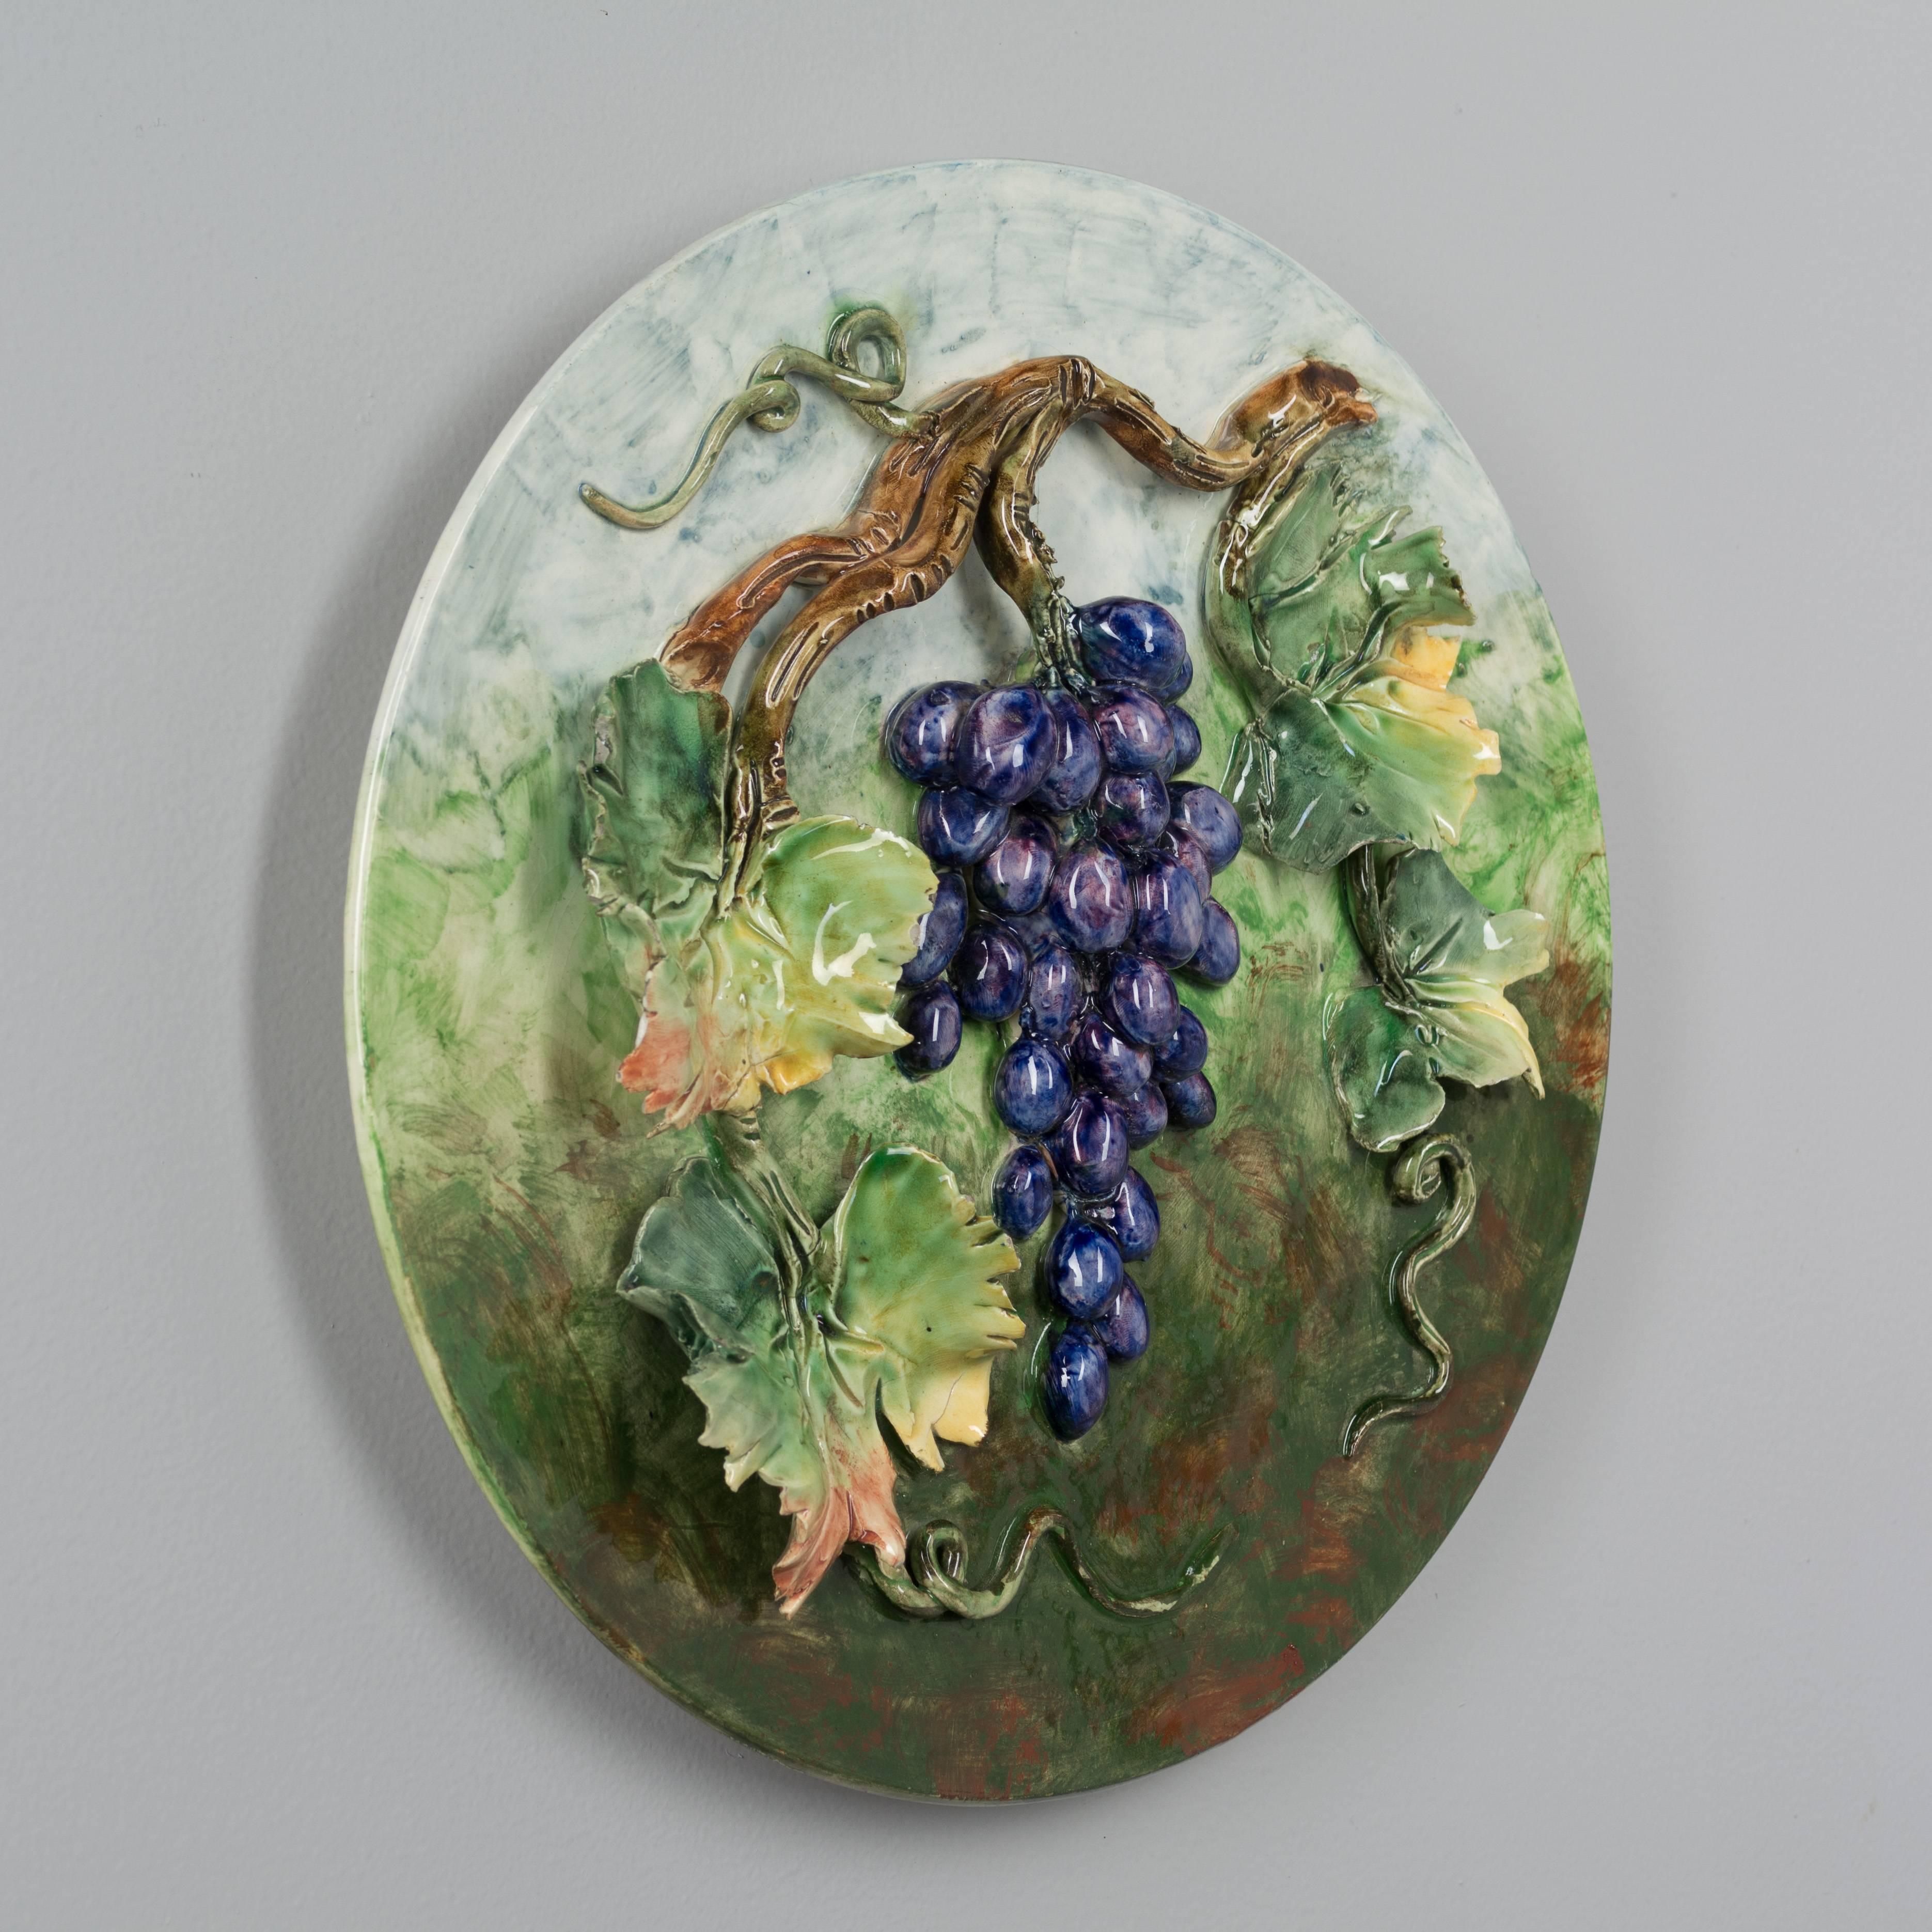 A 19th century French Barbotine Majolica wall platter with a bright purple grape cluster hanging from a vine with four large leaves and tendrils. Sculpted in high relief and hand-painted in vivid color. Stamped on back: Longchamp Terre de Fer.